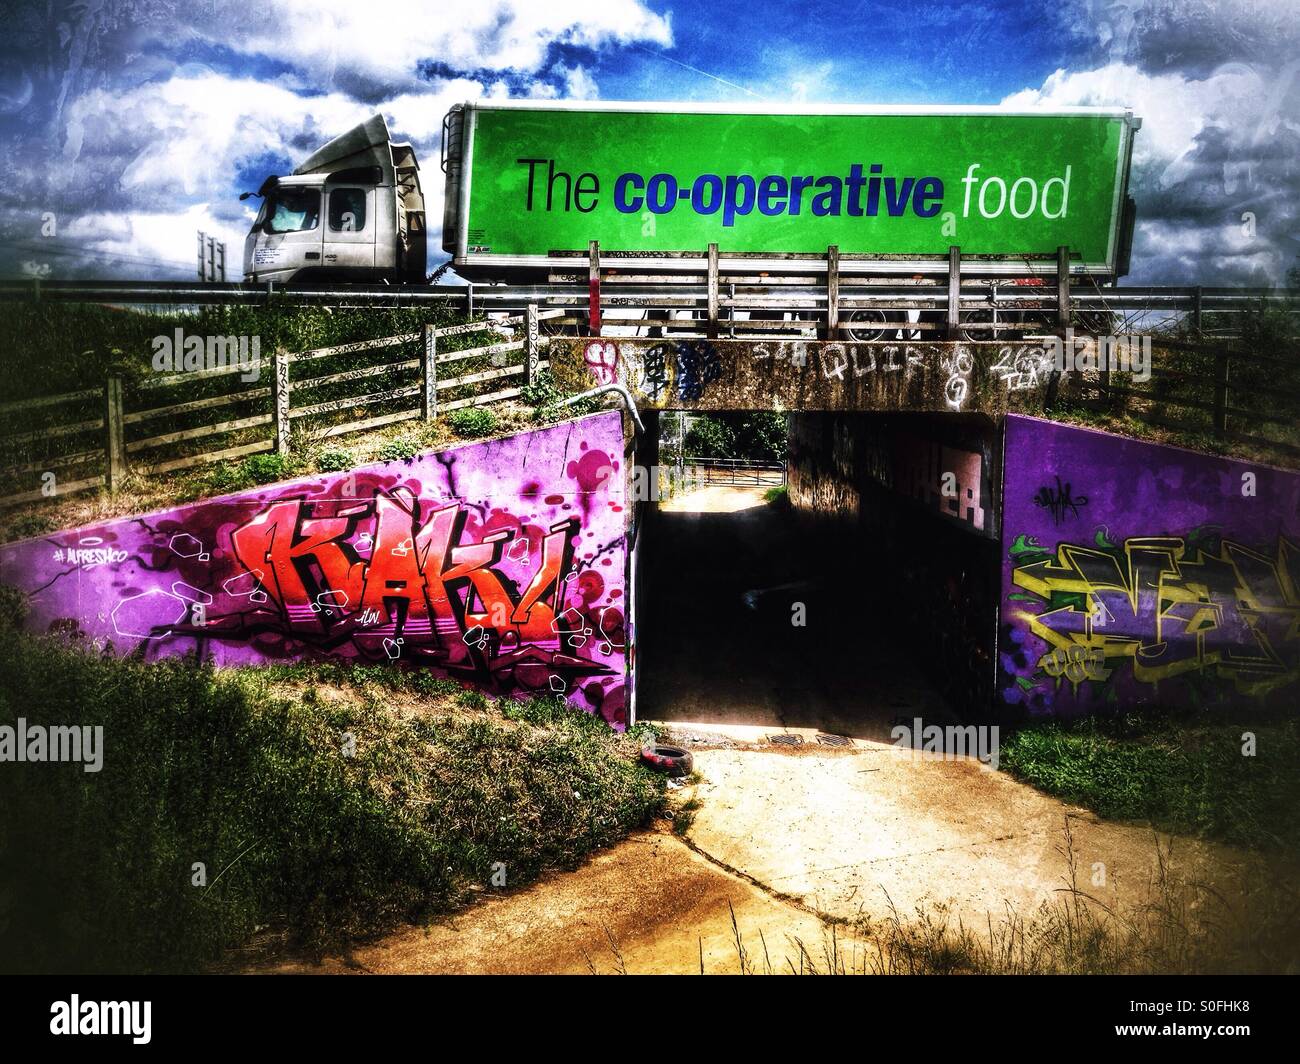 Co-op food lorry on A1 passing over subway decorated with graffiti. Eaton Socon, Cambridgeshire, England. Stock Photo